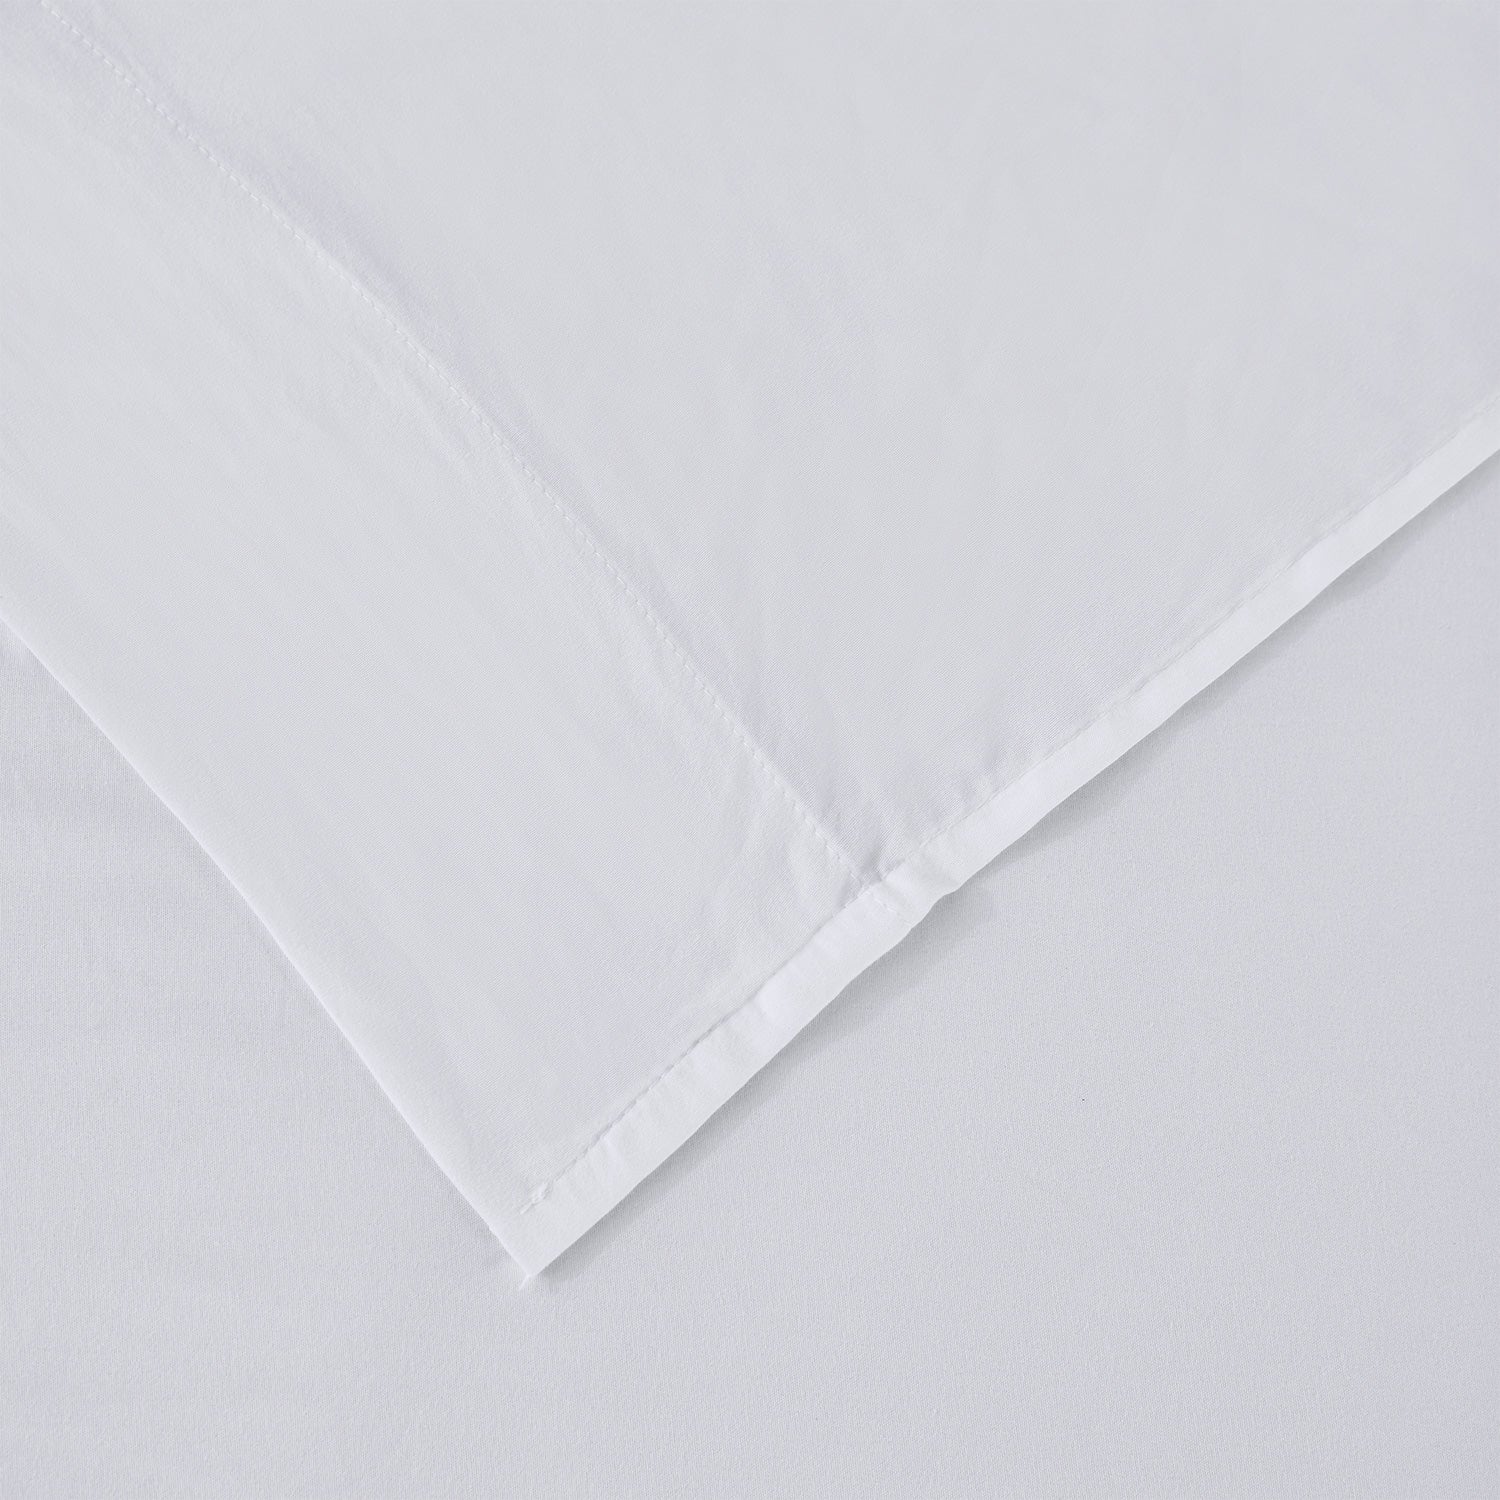 SOLID WHITE 4PC BEDDING SHEET SET - BREATHABLE AND COOLING SHEETS - HOTEL LUXURY - EXTRA SOFT - WRINKLE, FADE, STAIN RESISTANCE